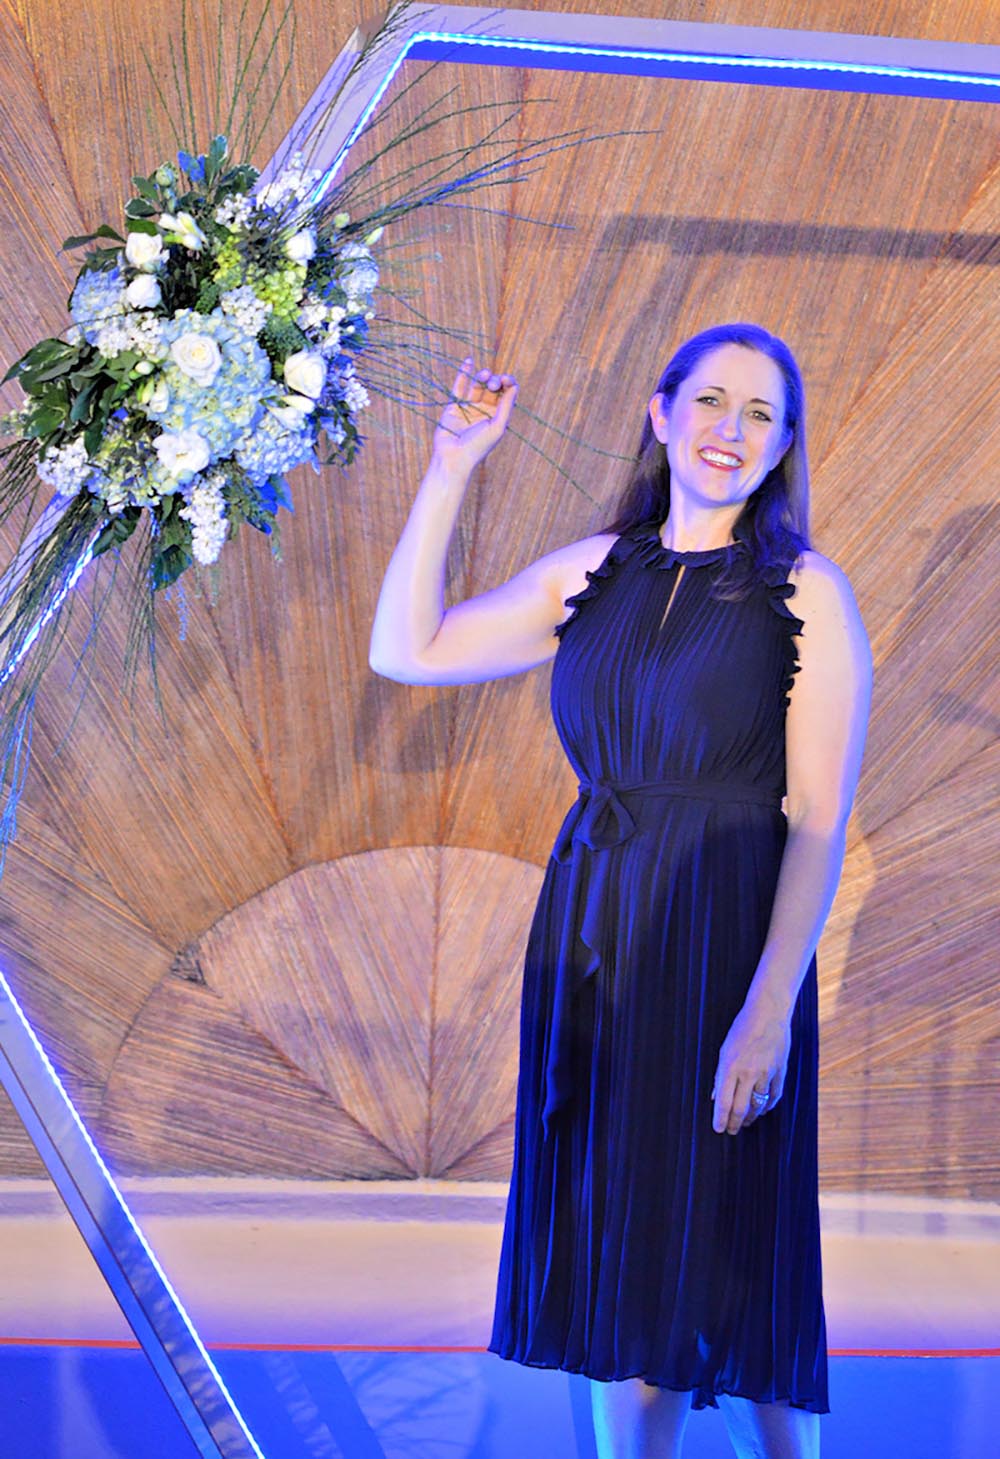 A woman wearing a dark colored dress stands next to flowers hanging on a DIY hexagon backdrop.